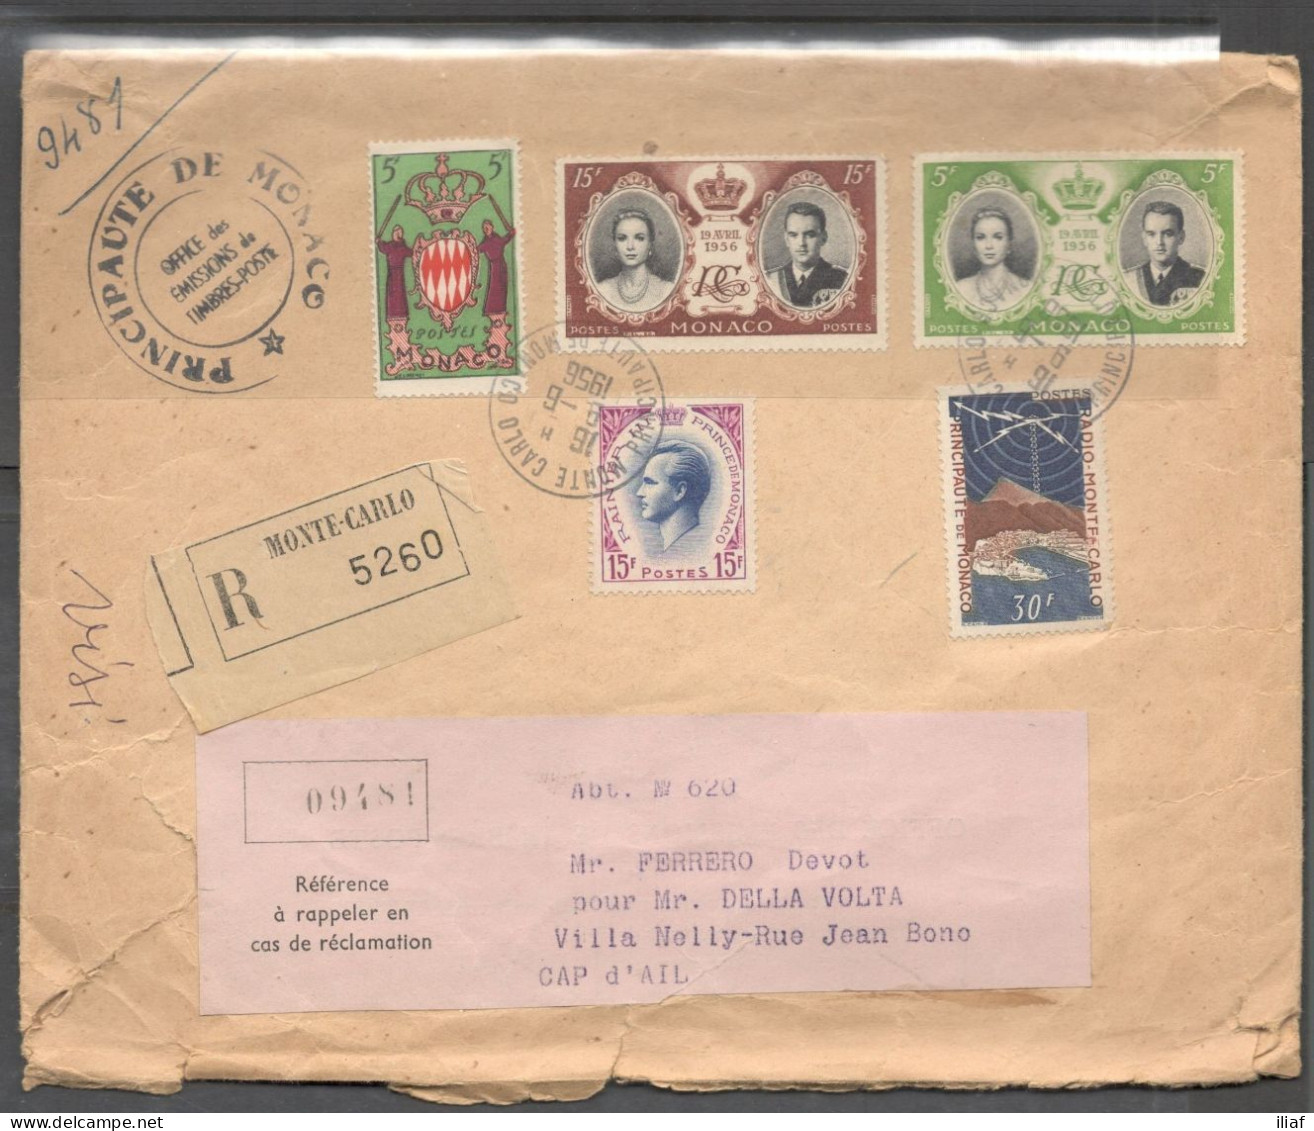 Monaco. Stamps Sc. 280, 318, 337, 369-370 On Registered Letter, Sent From Monte-Carlo, Monaco On 9.06.1956 To Cap-d'Ail - Cartas & Documentos